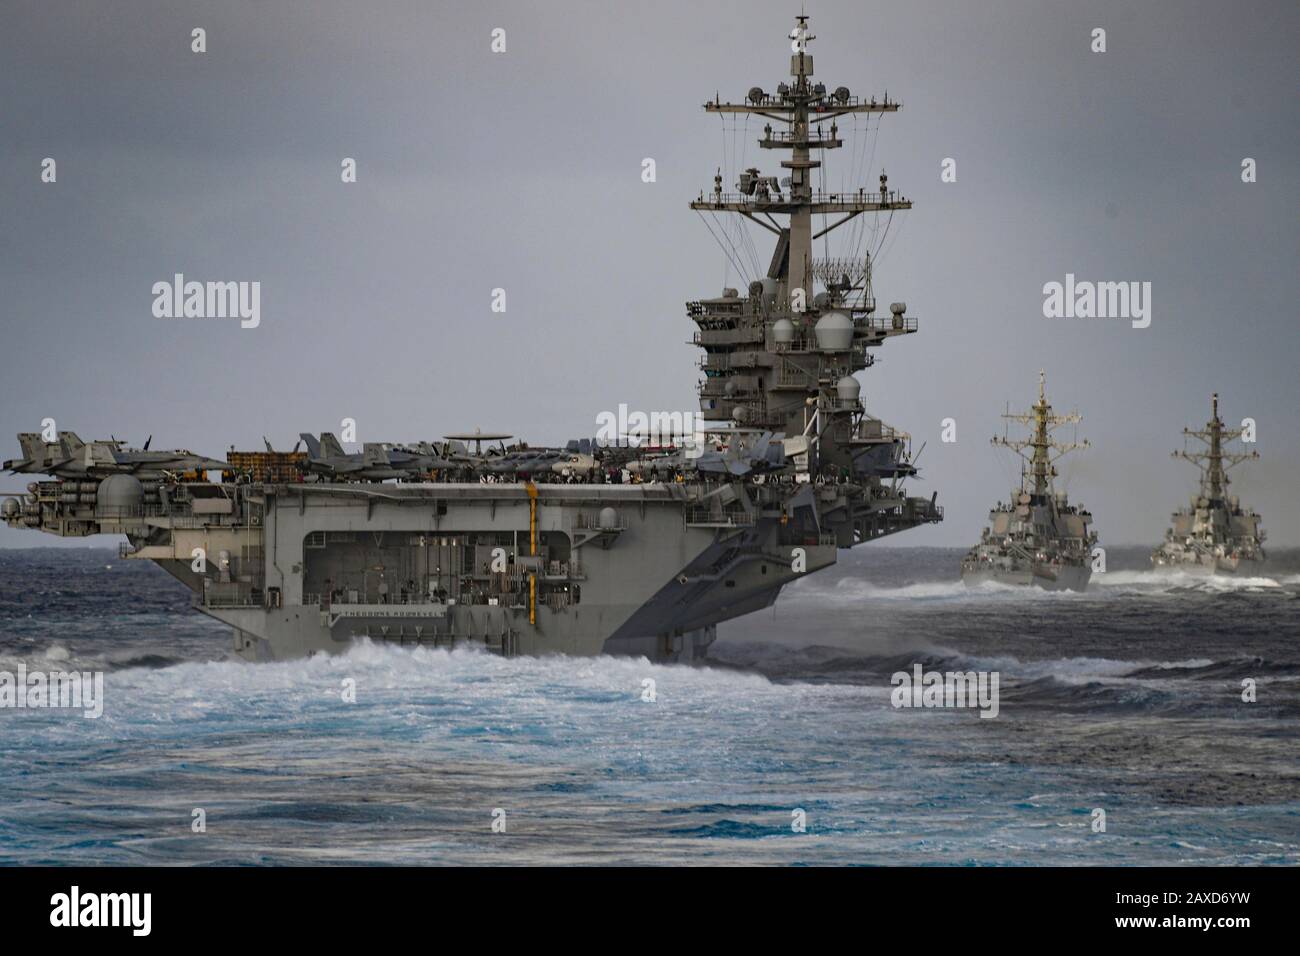 A U.S. Navy Nimitz-class nuclear powered aircraft carrier USS Theodore Roosevelt, Arleigh Burke-class guided-missile destroyers USS Russell and USS Paul Hamilton transits the Pacific Ocean December 2, 2019 in the Pacific Ocean. Stock Photo